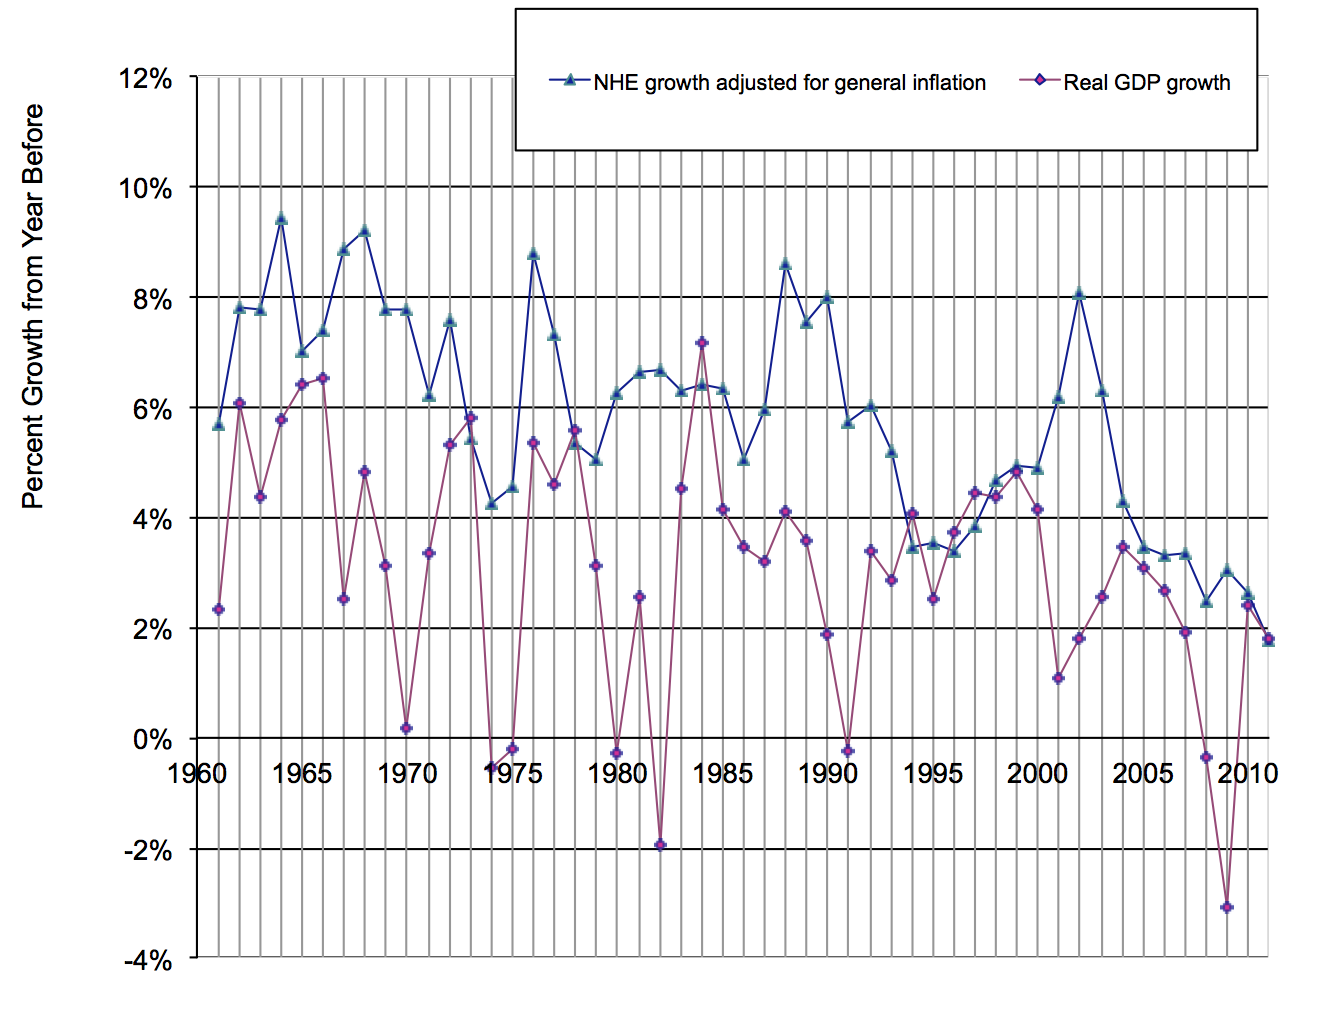 GDP and NHE growth rates adjusted for inflation